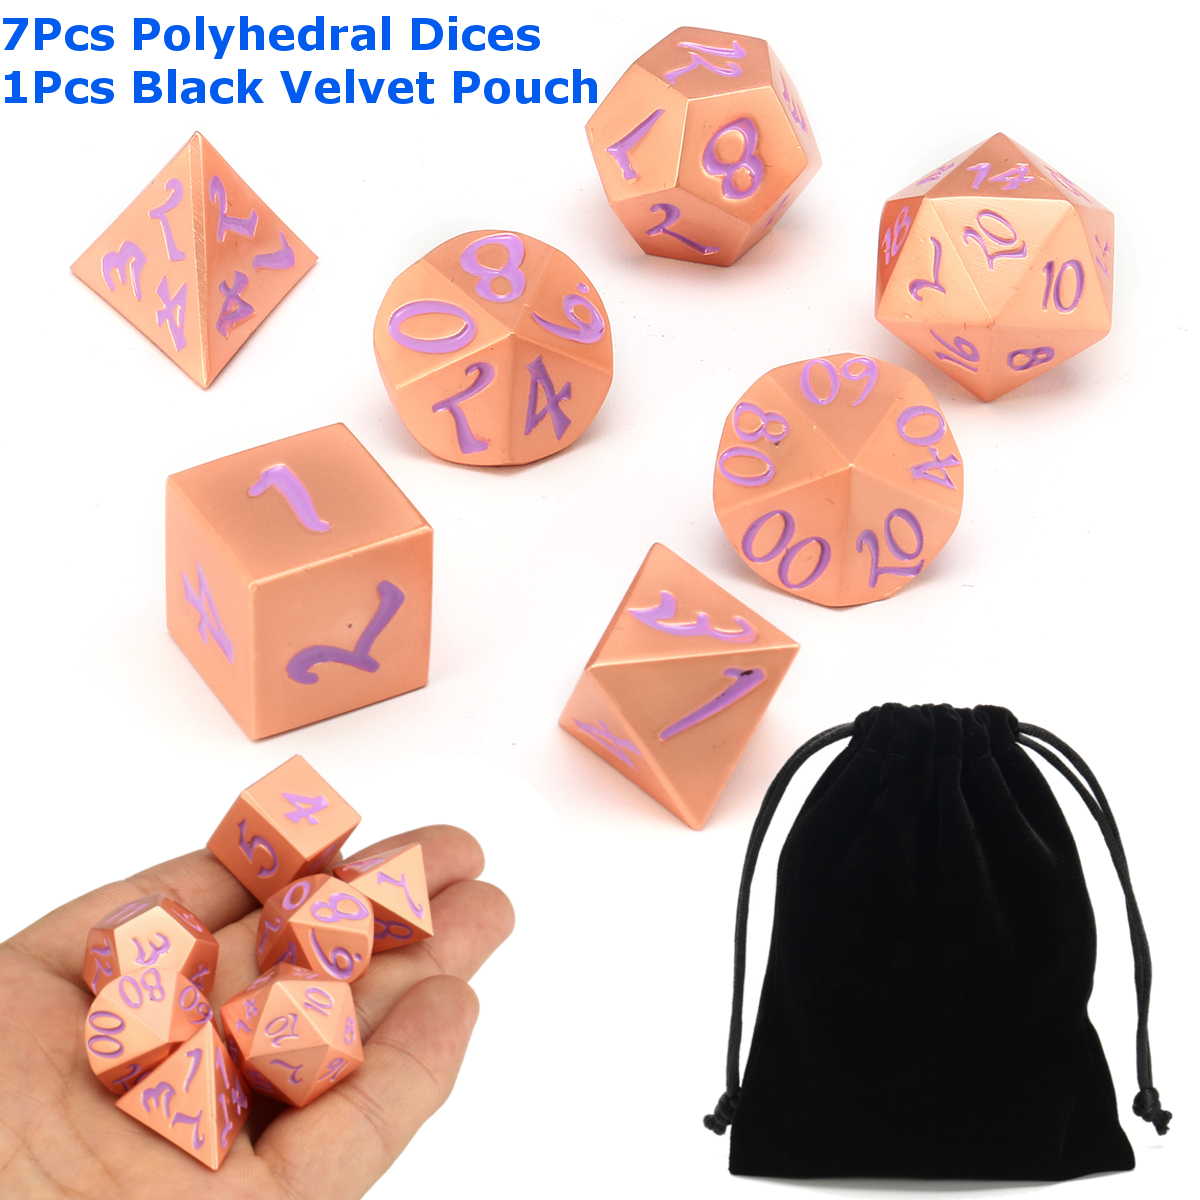 7Pcs-Antique-Metal-Polyhedral-Dice-Role-Playing-Game-Dices-Heavy-Duty-With-Bag-1320392-1